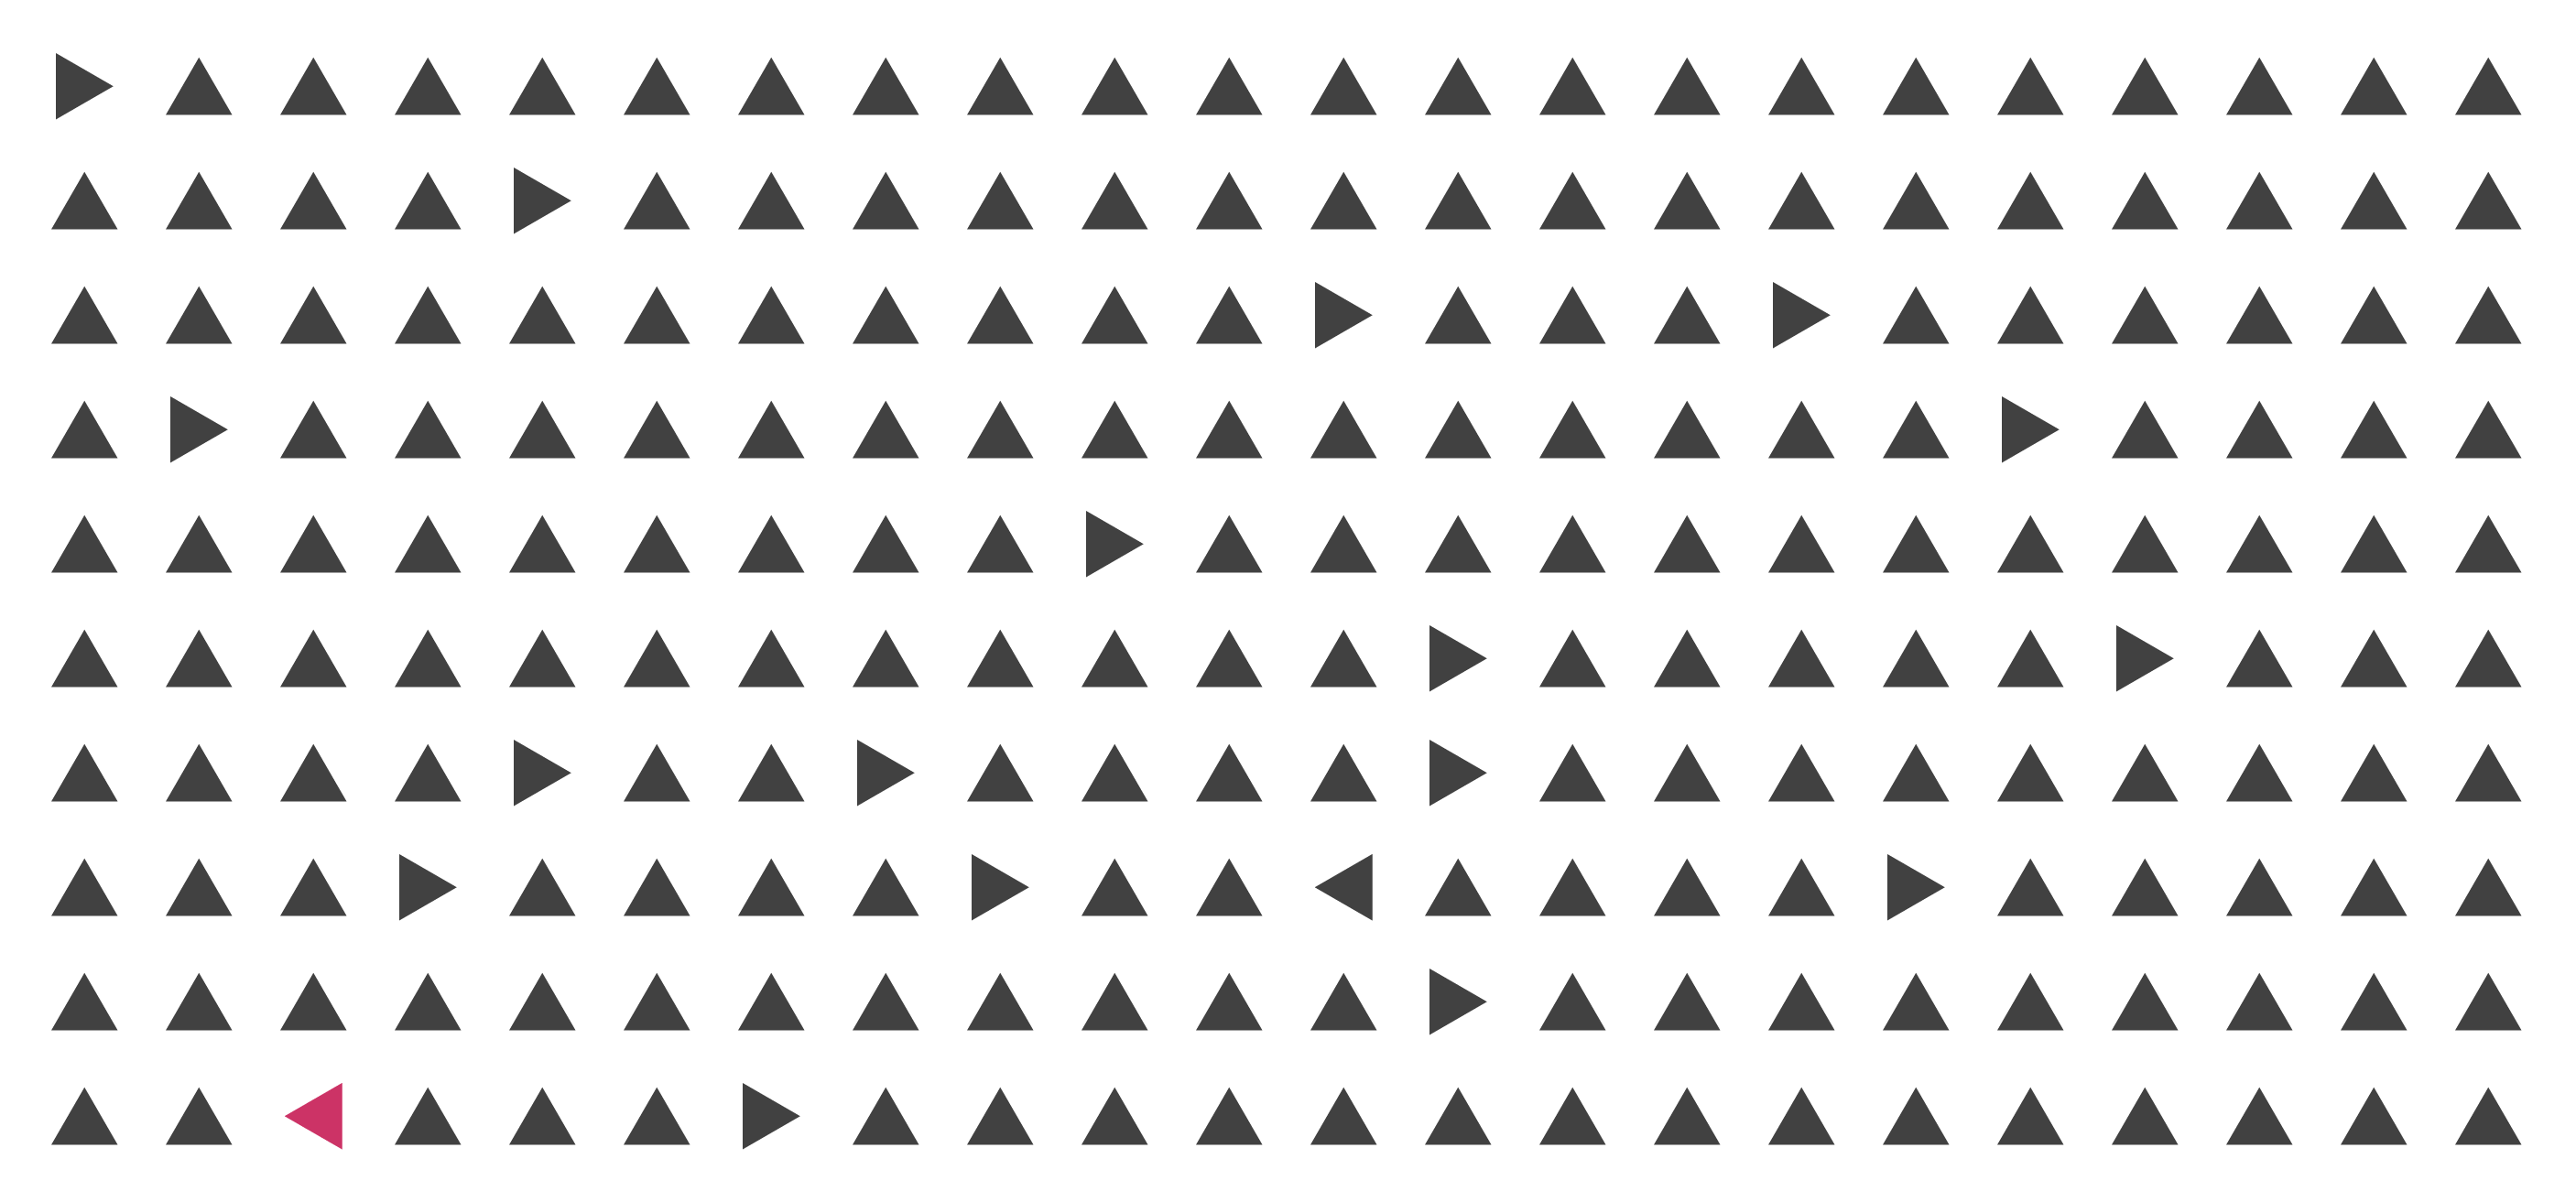 A series of triangles with only one pointing to the left. It's harder to point the add one out because there are different distracting elements that take away from the ability of people to notice it.